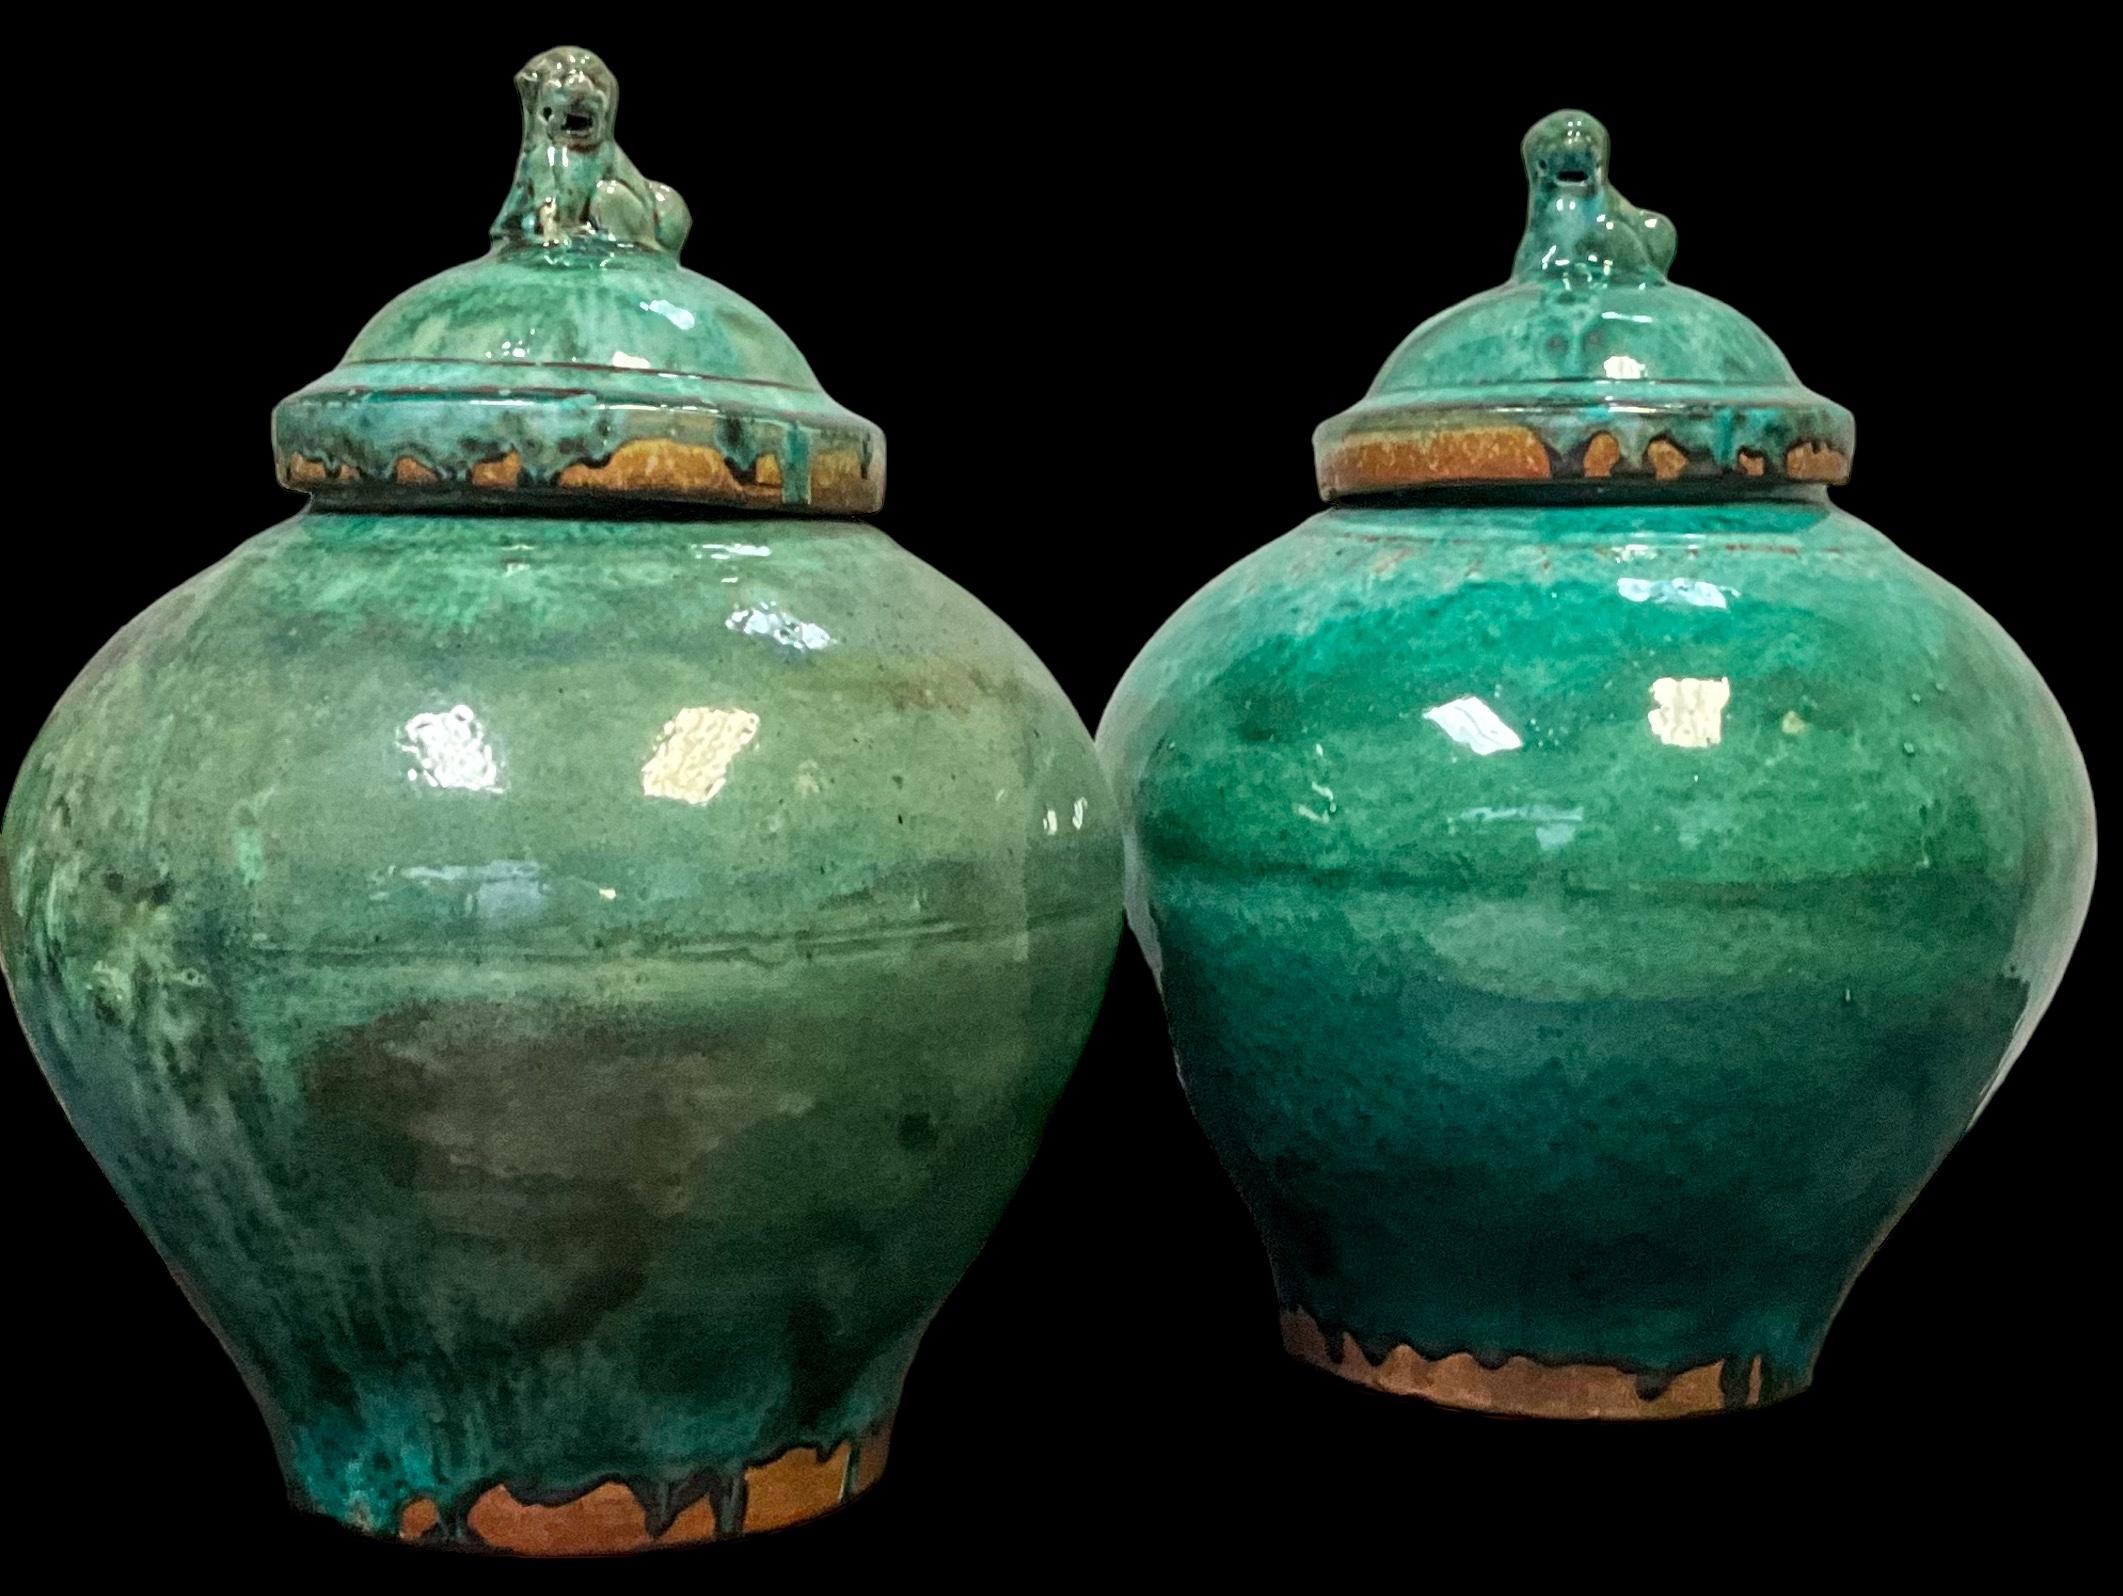 This is a pair of large scale Chinese Export style terracotta green glazed jars. The lids have foo dog finials. Both vessels have a drip majolica glaze with firing irregularities. Highly decorative and unmarked. 